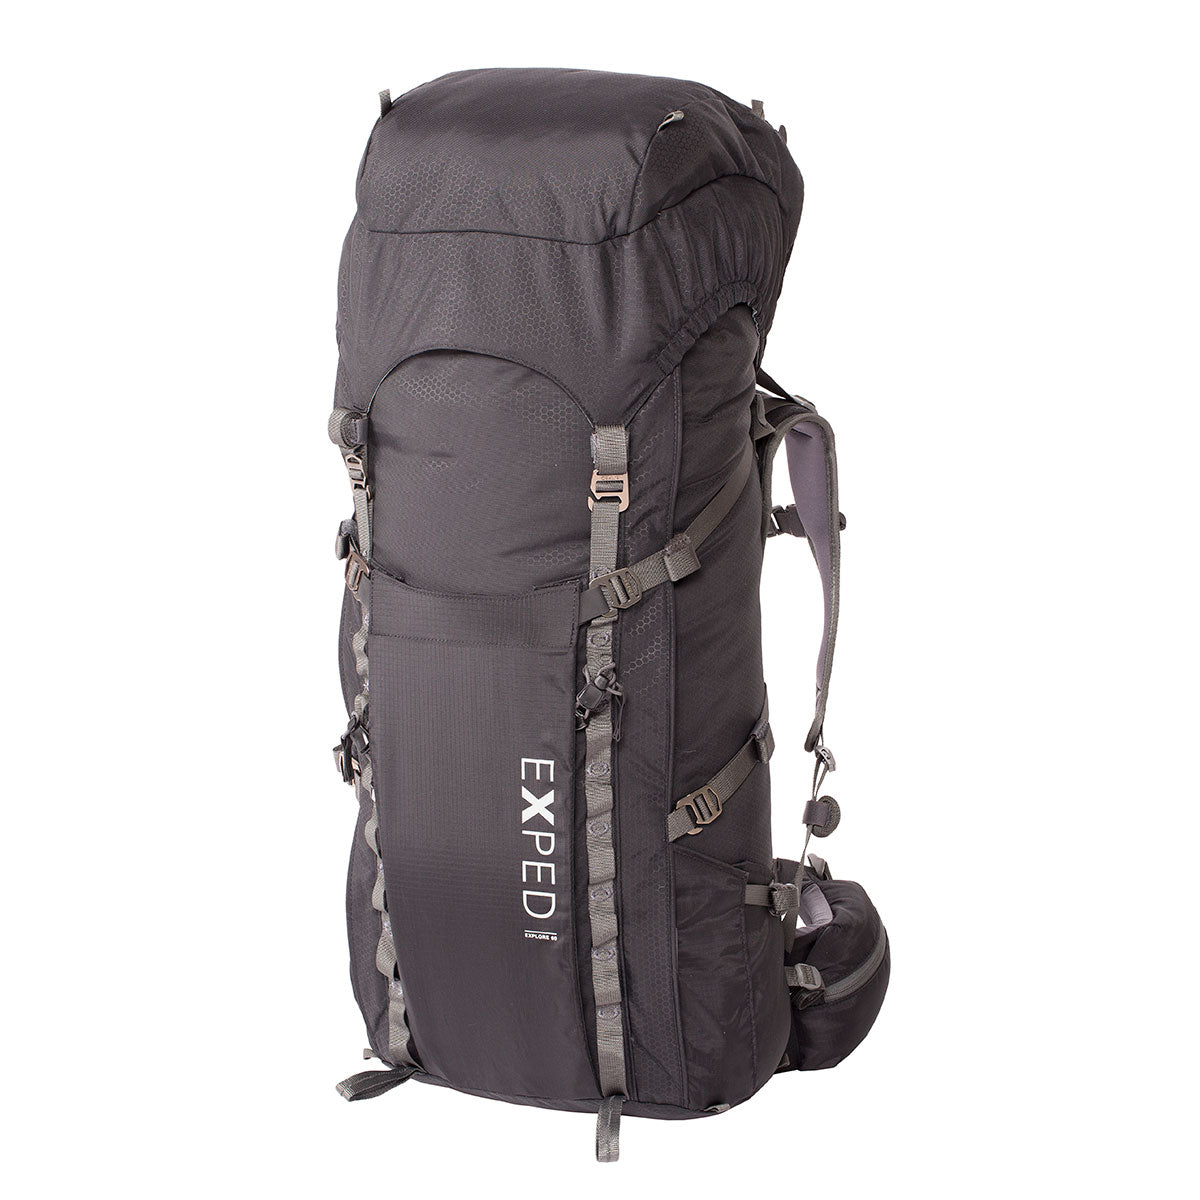 EXPED EXPLORE 60 Hiking Pack